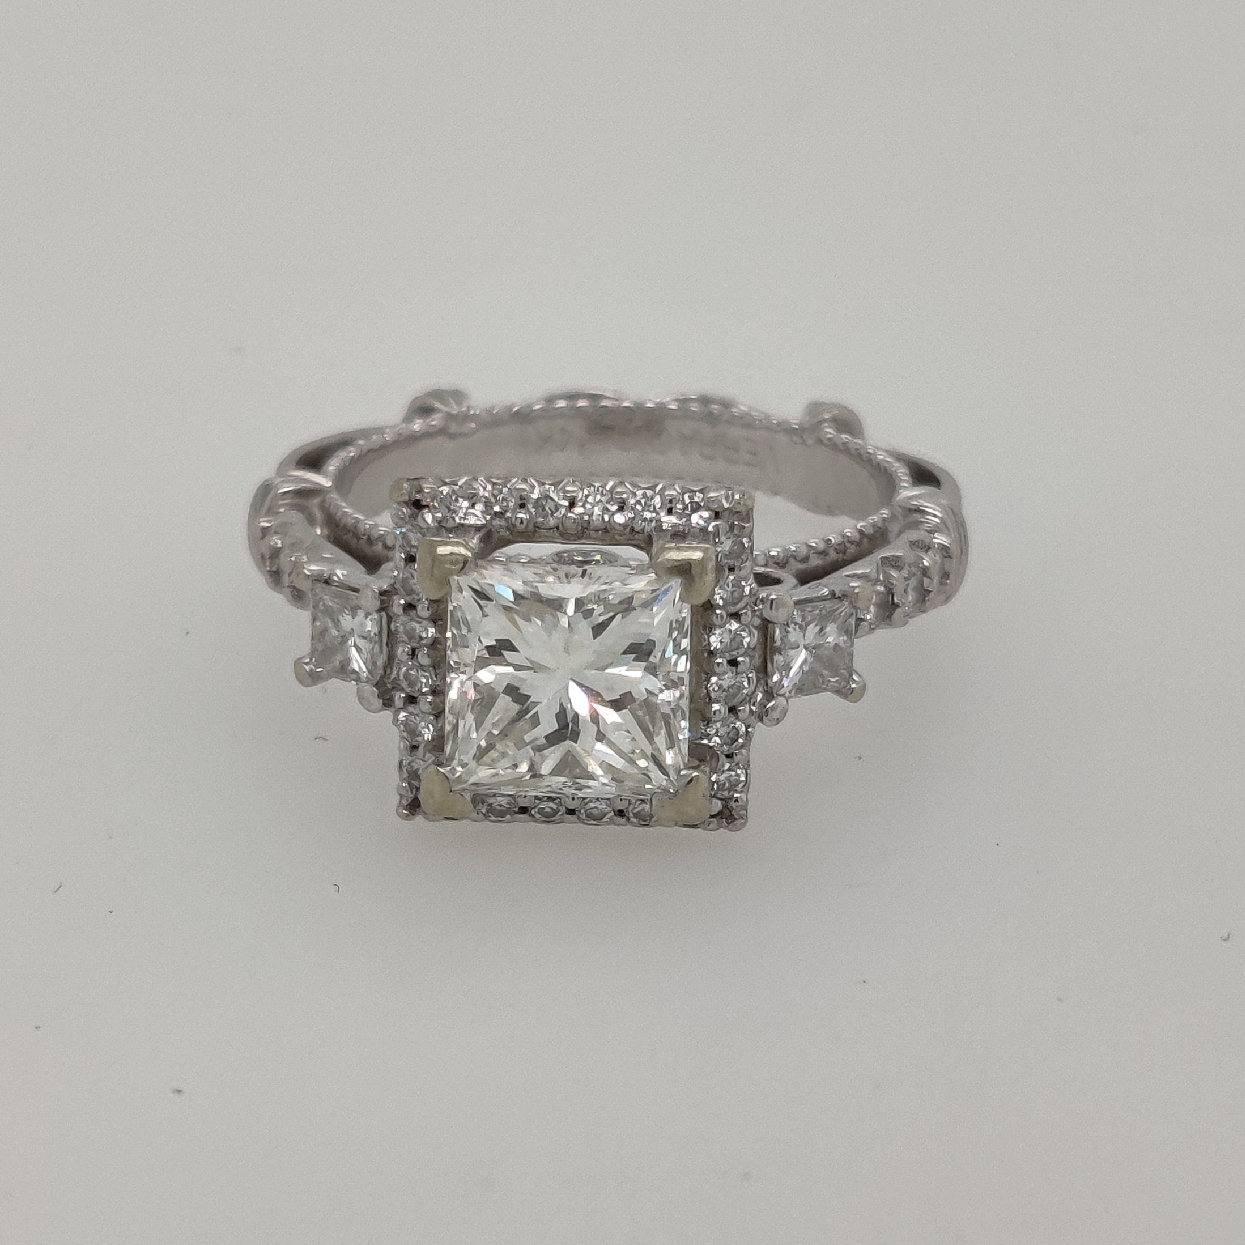 14K White Gold Verragio   Parisian   Collection Engagement Ring with 1.53 CT Princess Cut Center Stone; Size 5.25
Center Stone is J Color/SI2 Clarity
Accent Stones are approximately 0.50CTTW; G/VS2
Appraisal on File